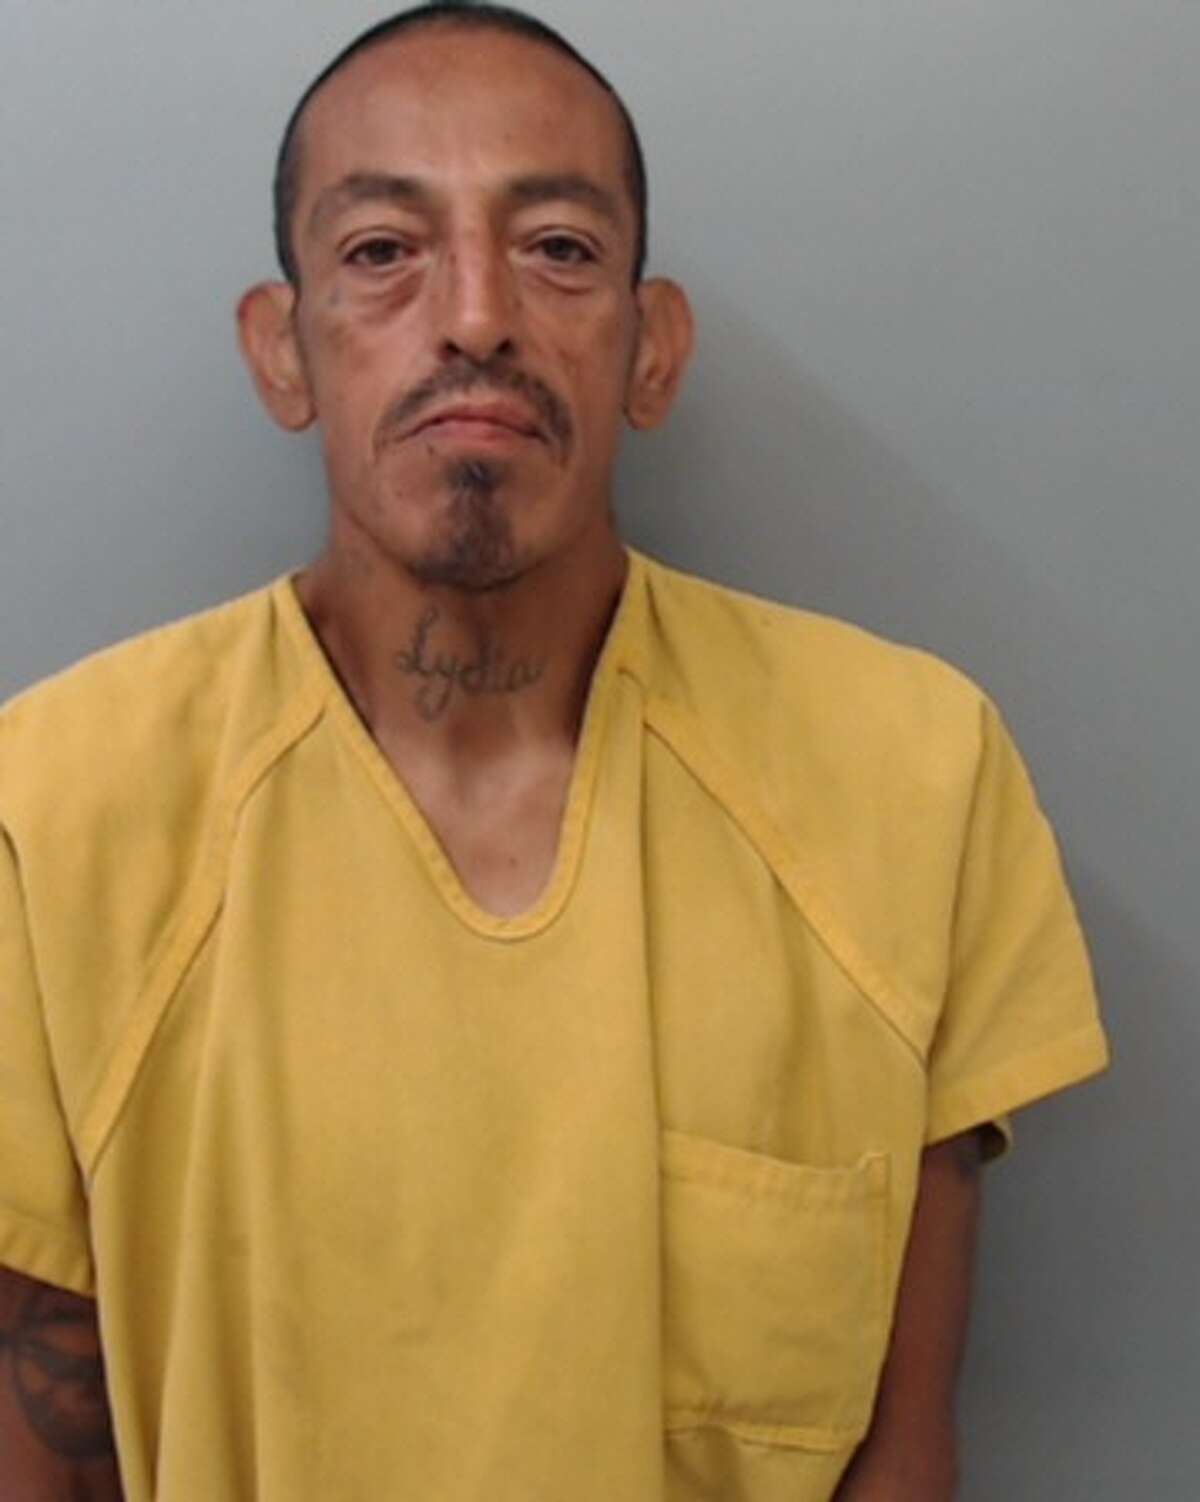 Rogelio Barrientos Jr., 49, was also charged with burglary of a vehicle and theft of property.